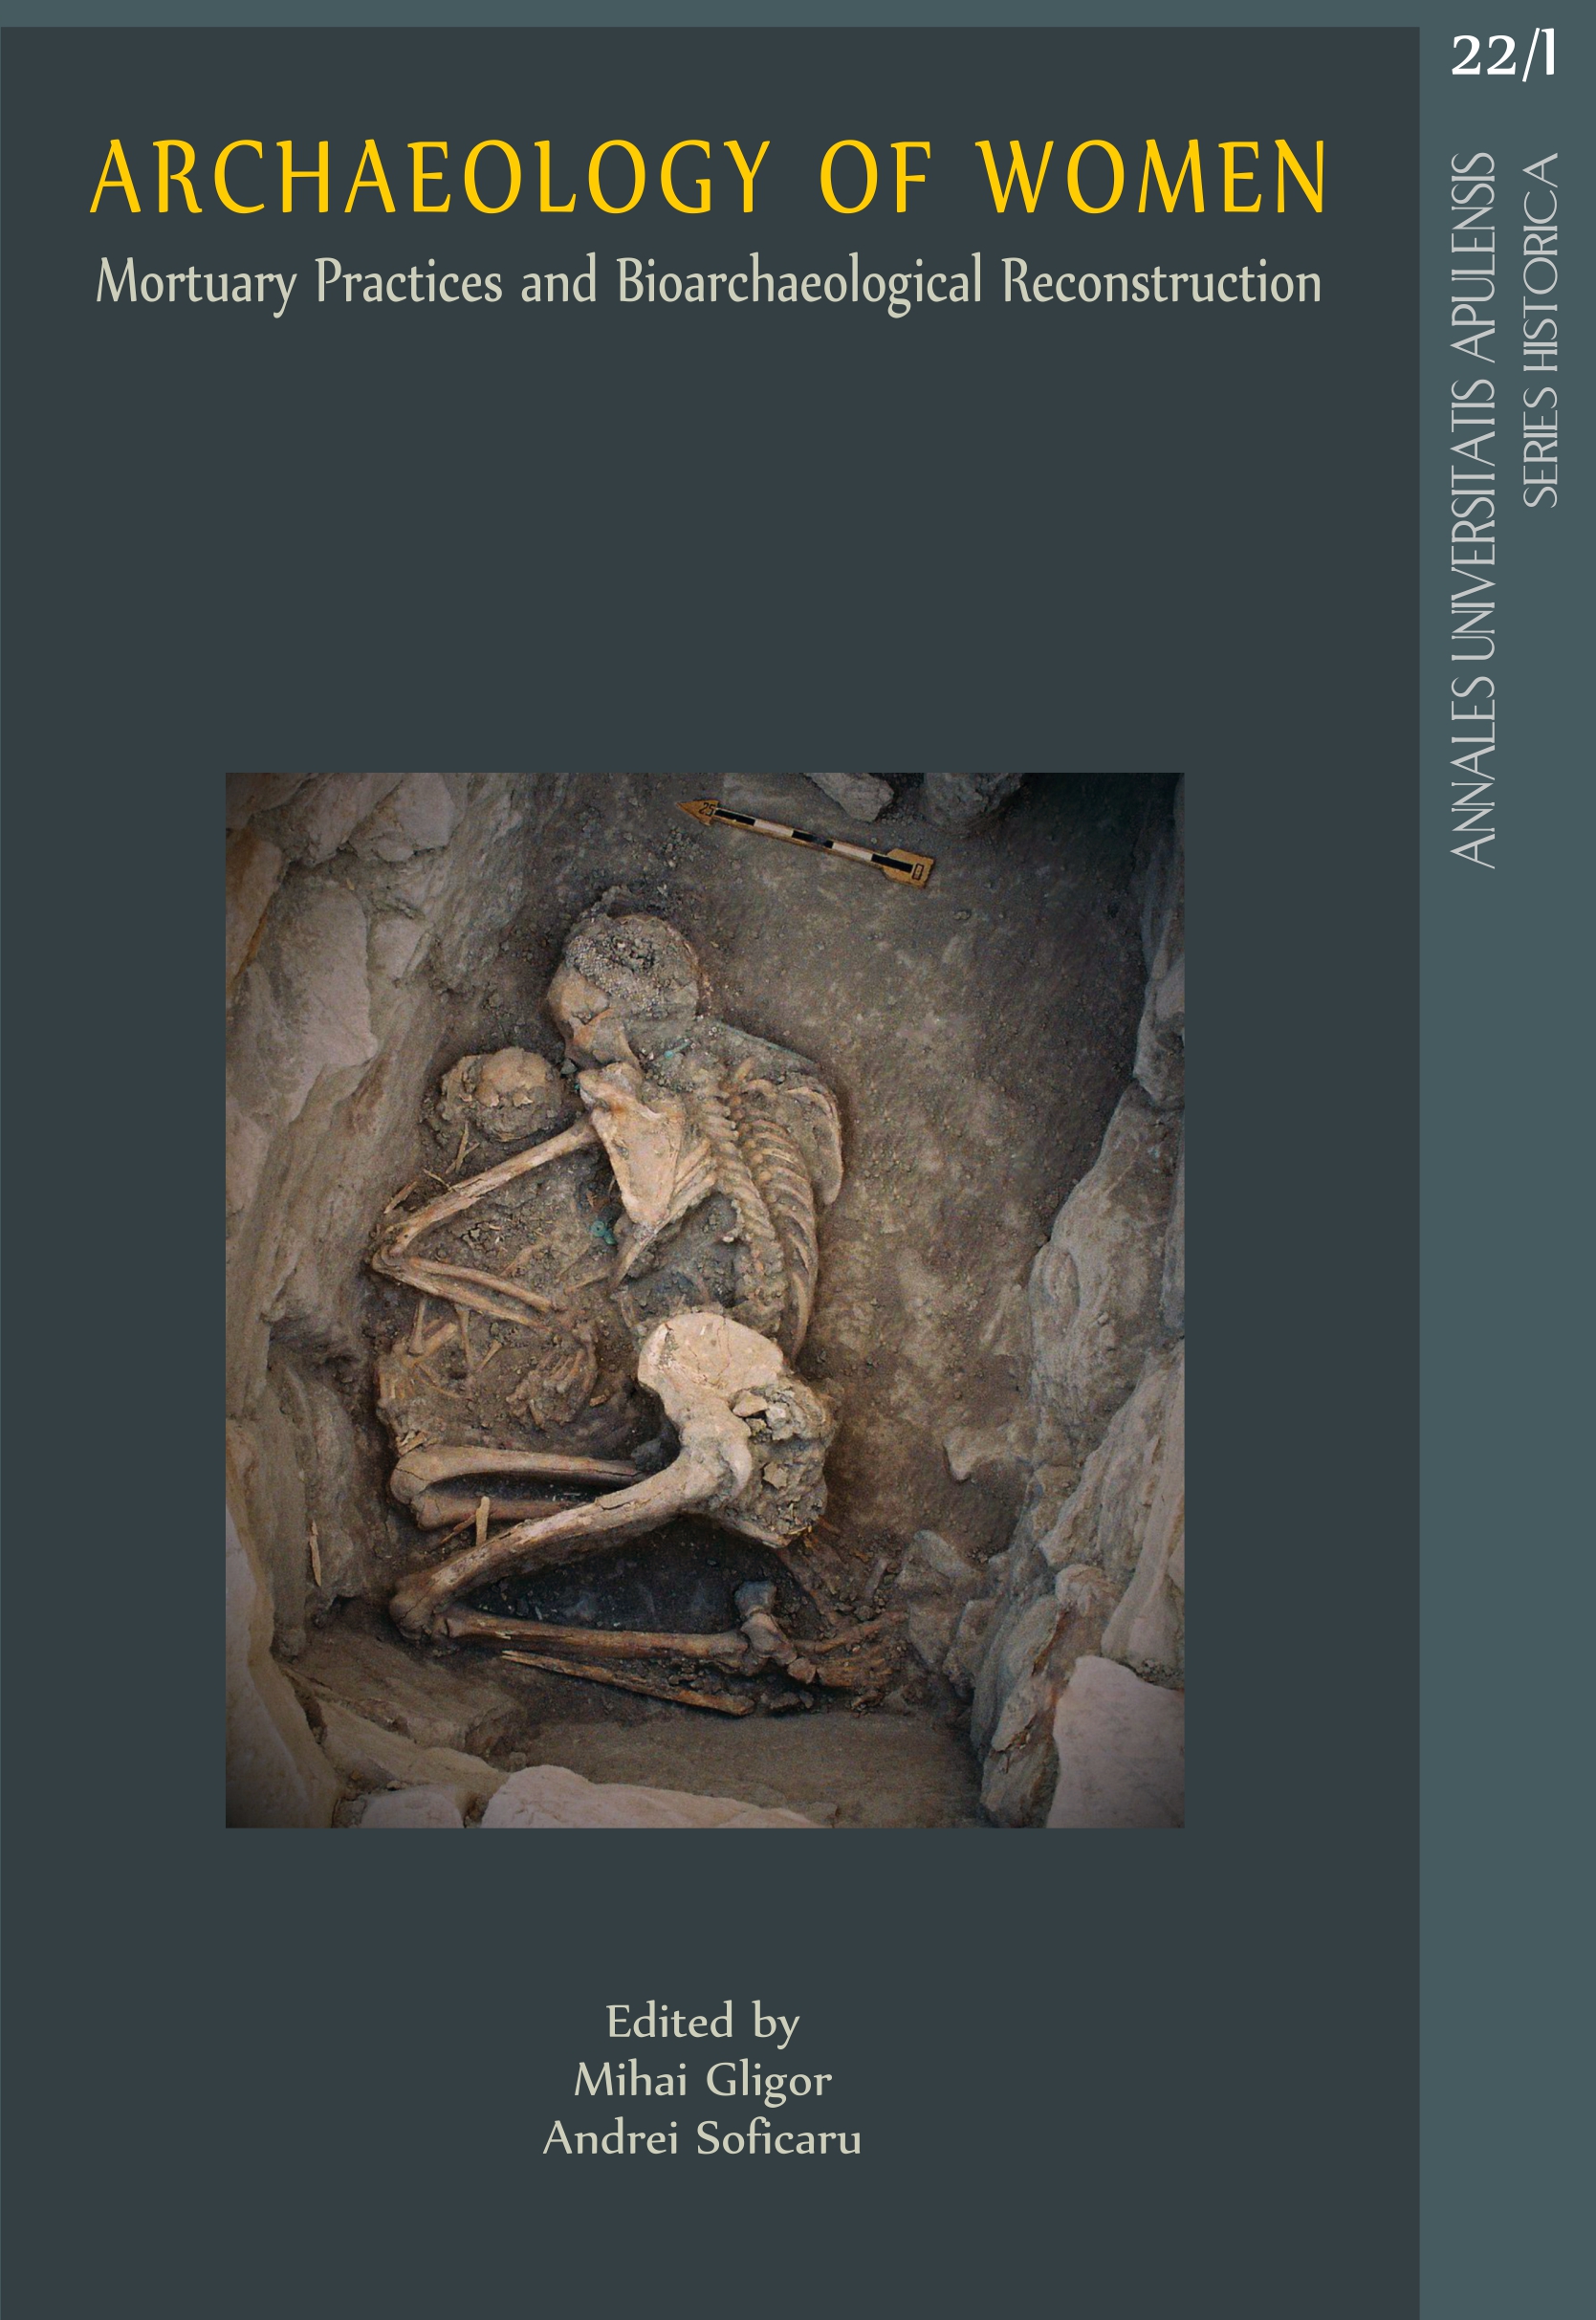 Monasticism and Activity Patterns: Evaluating Osteoarthritis Distribution and Entheseal Changes in a Feminine Monastic Community (Santa Maria de Vallsanta, Spain)